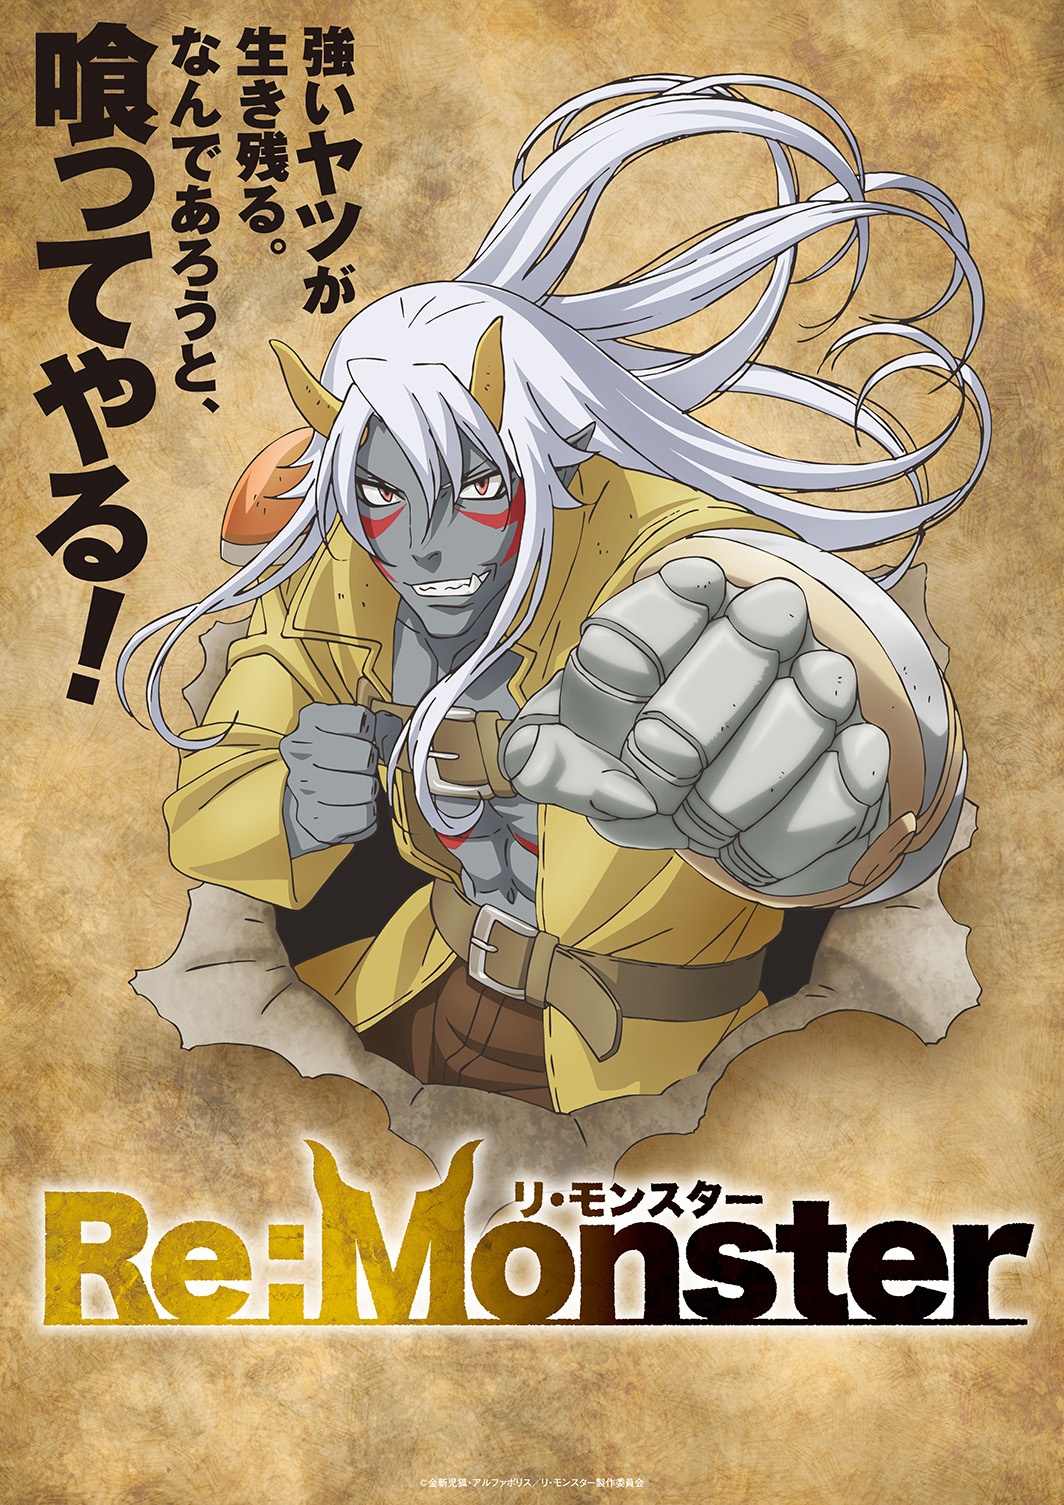 Fantasy Isekai Series Re:Monster to Receive an Anime Adaptation